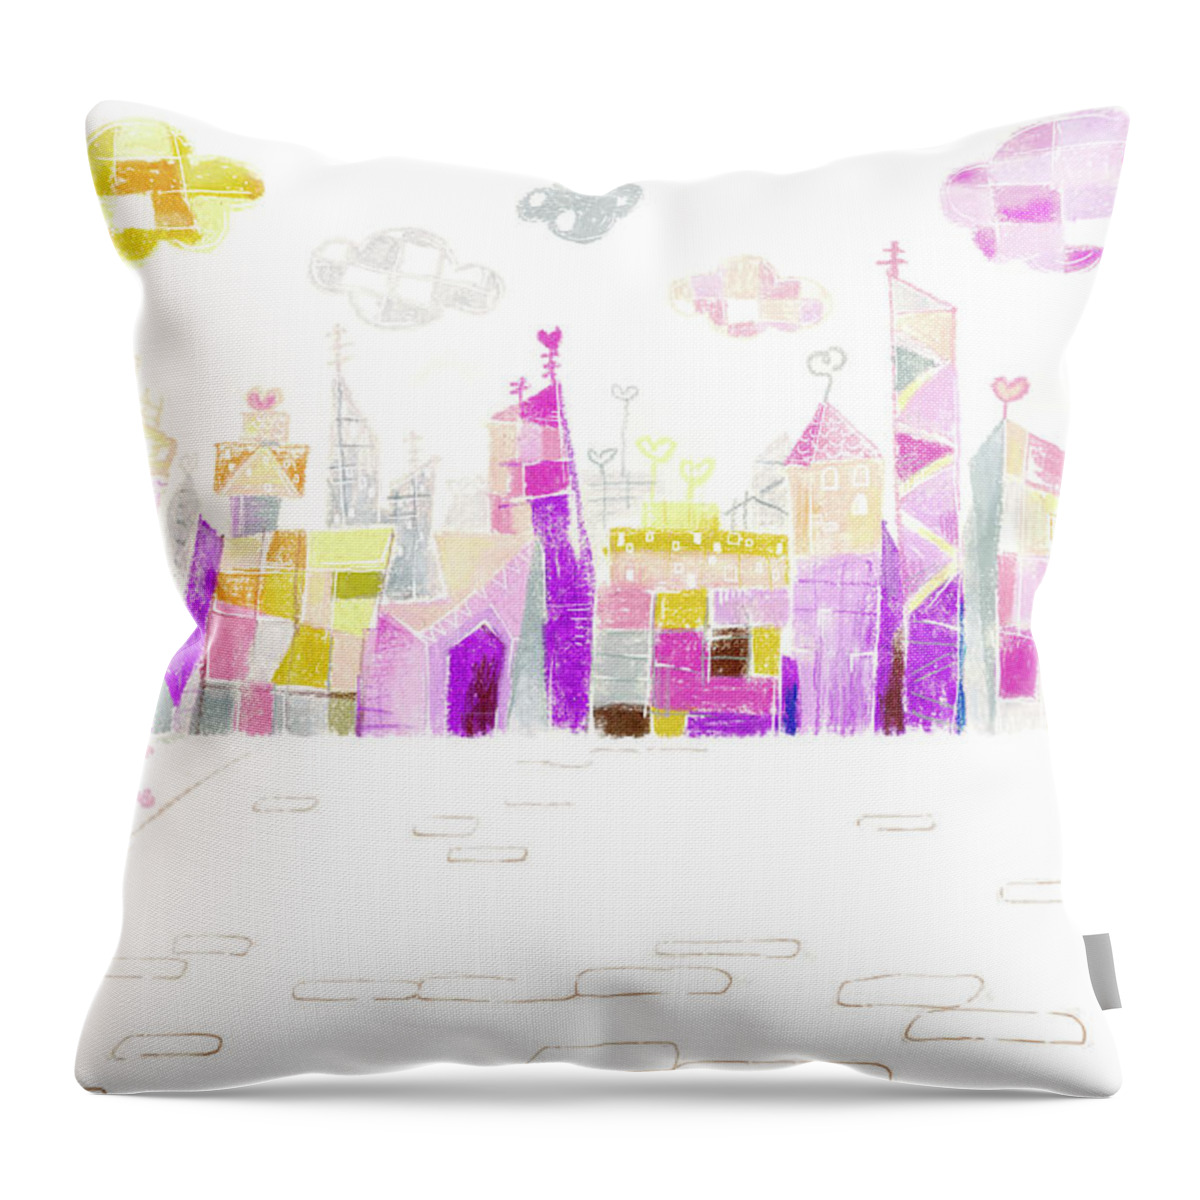 Downtown District Throw Pillow featuring the digital art Fantastic Buildings by Bji/blue Jean Images